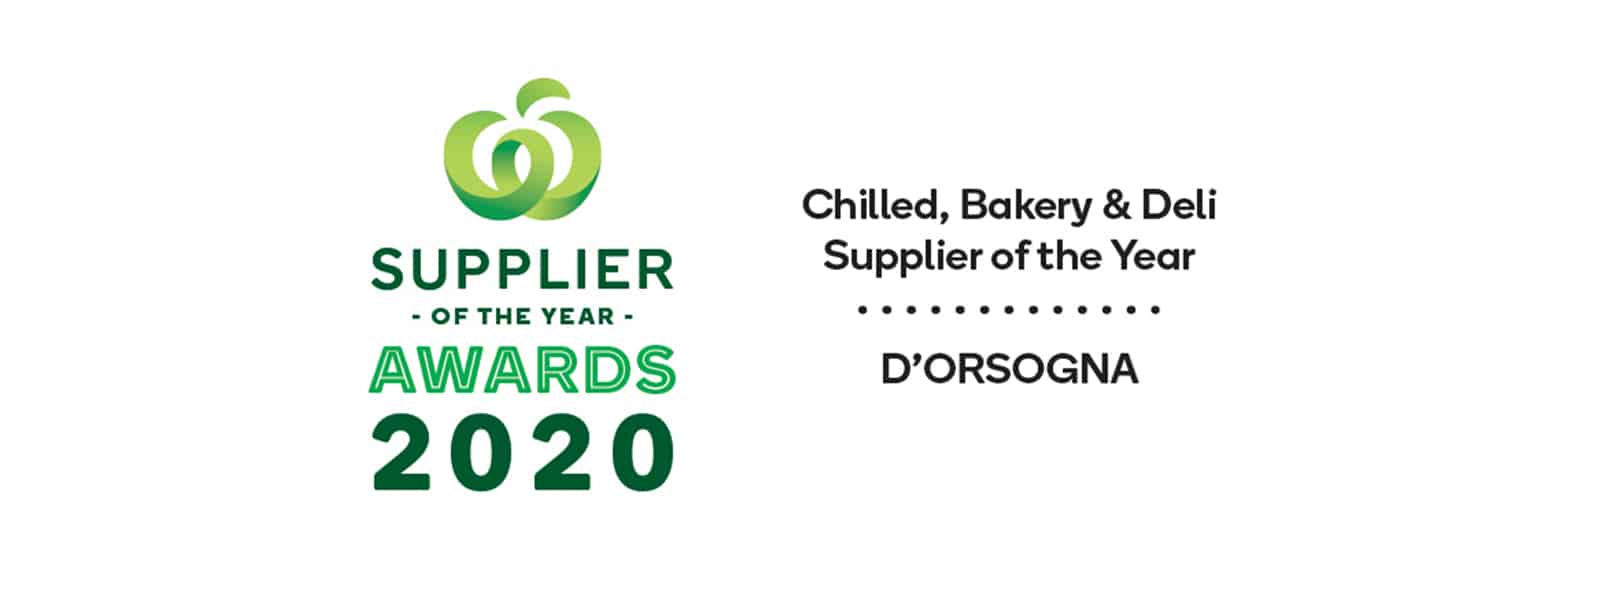 D’Orsogna wins Woolworths’ Supplier of the Year 2020 award